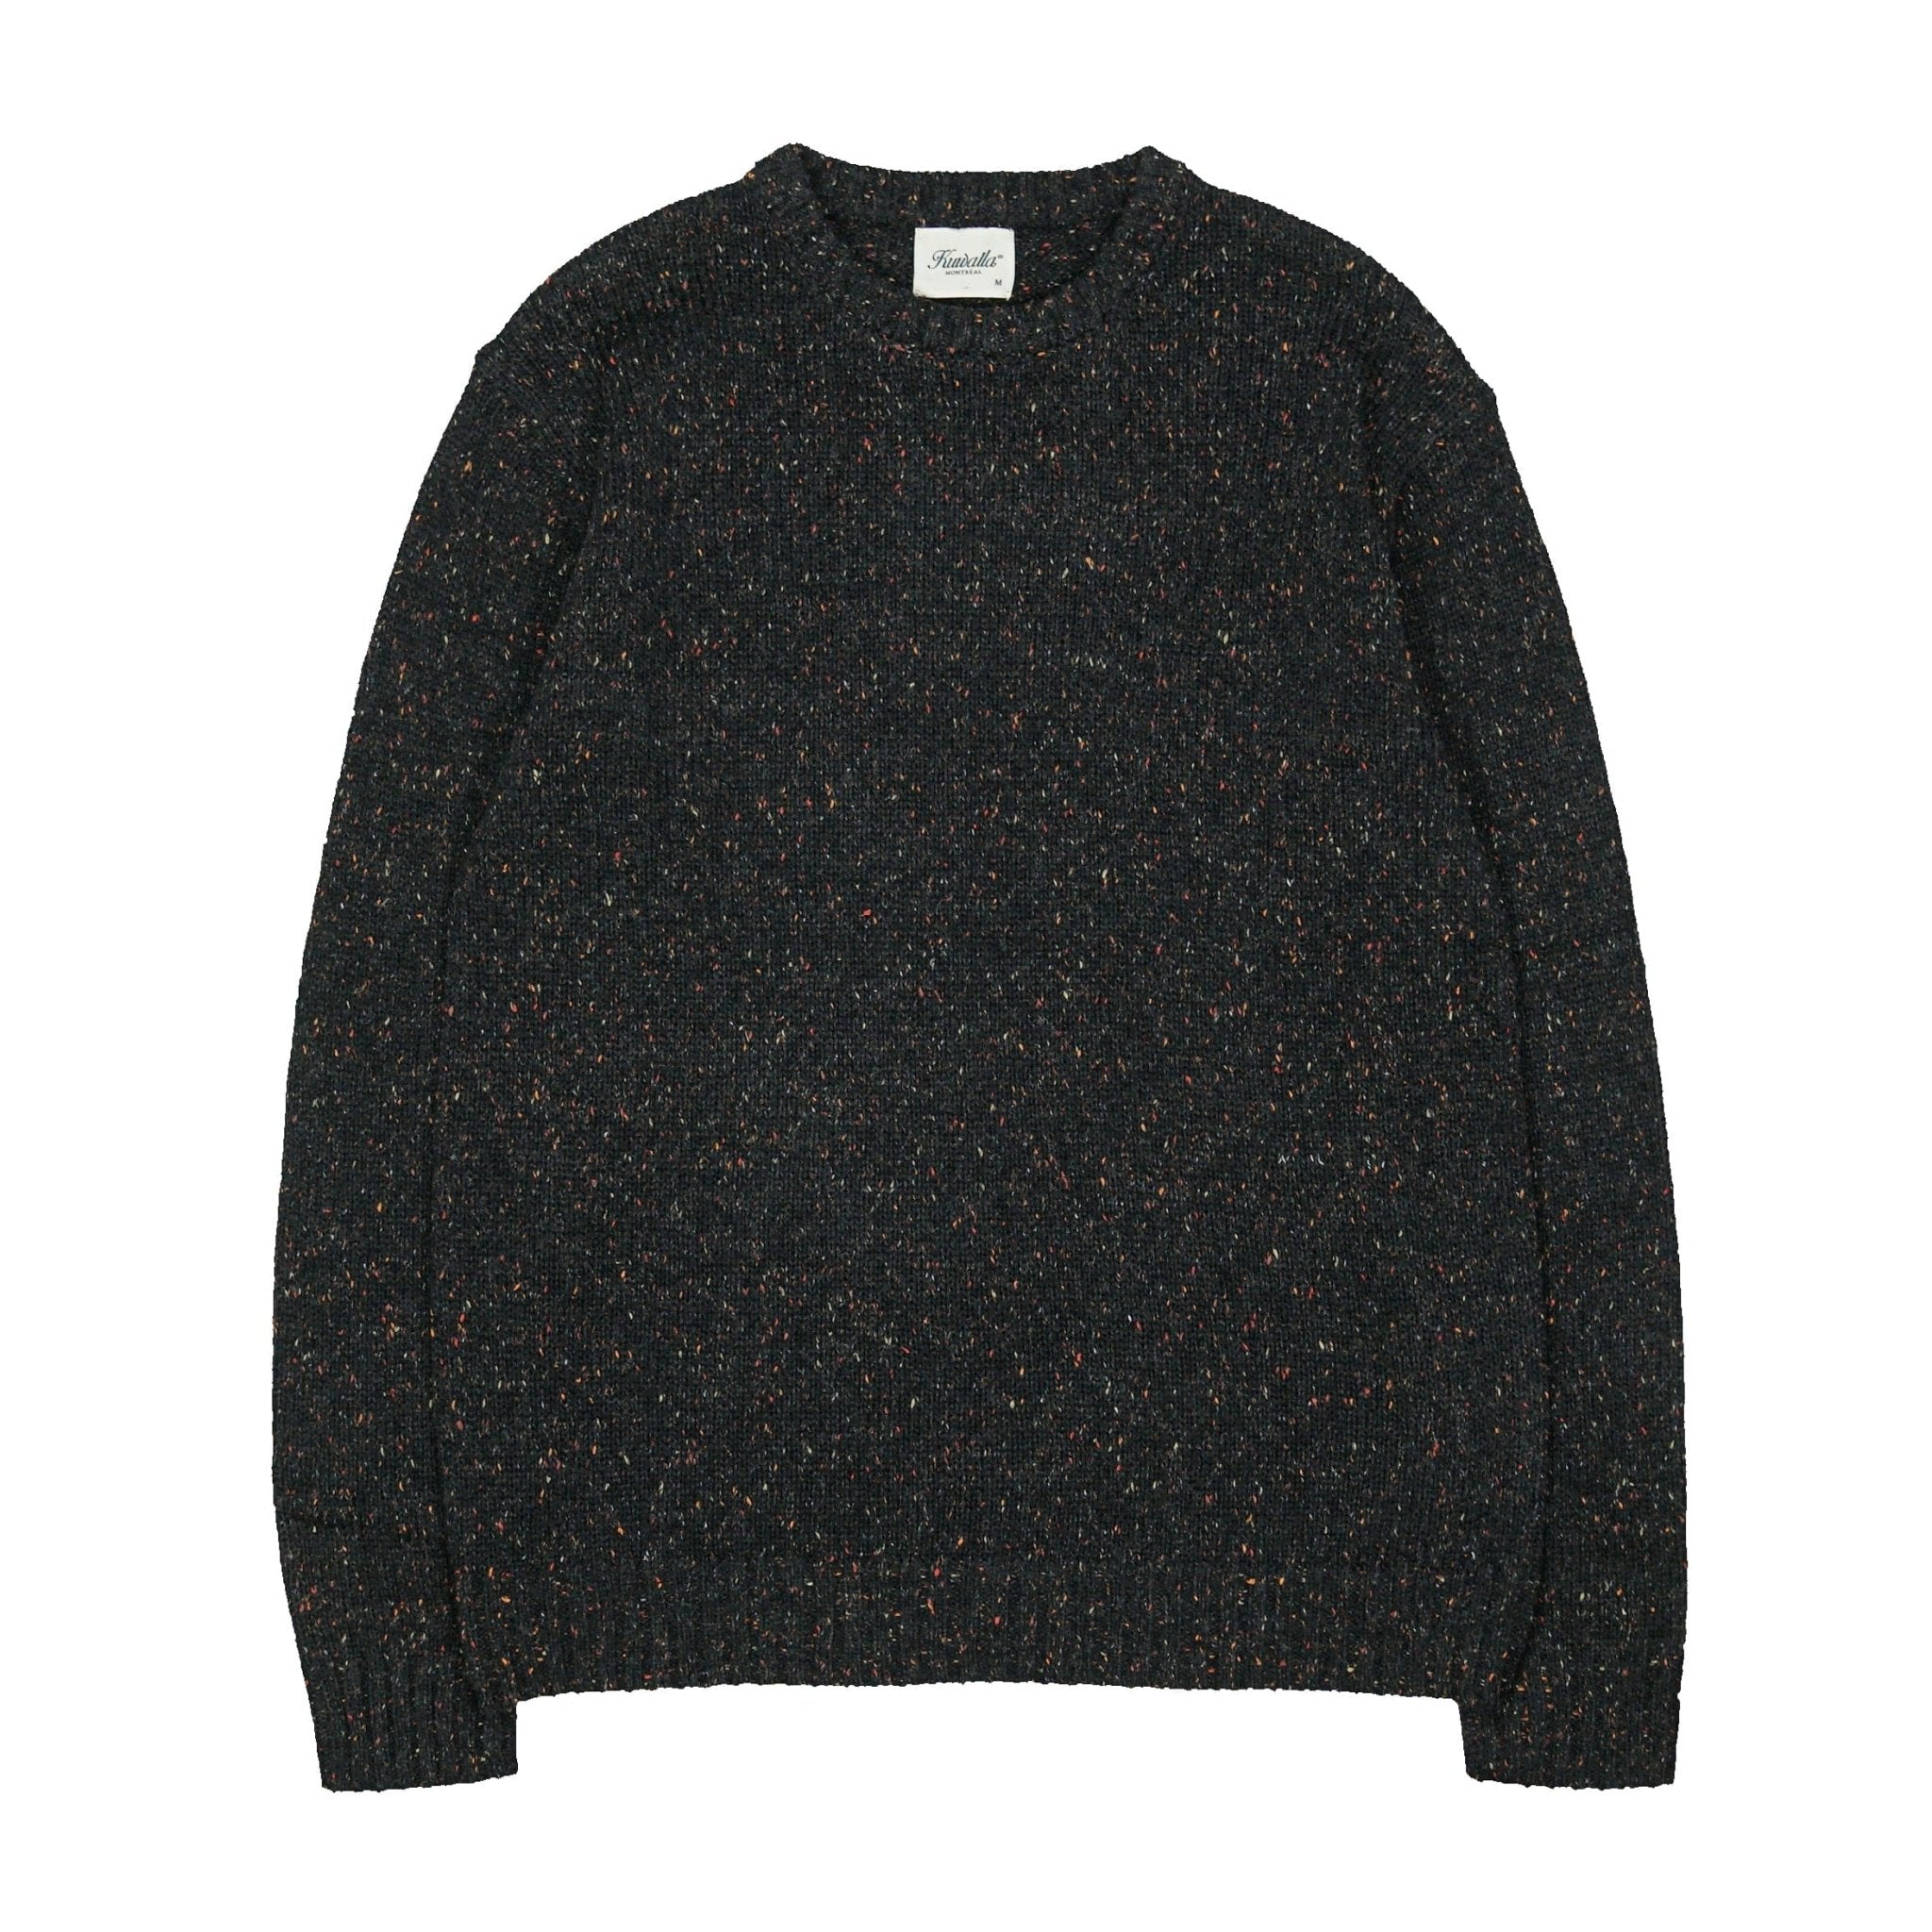 Speckled Sweater in black